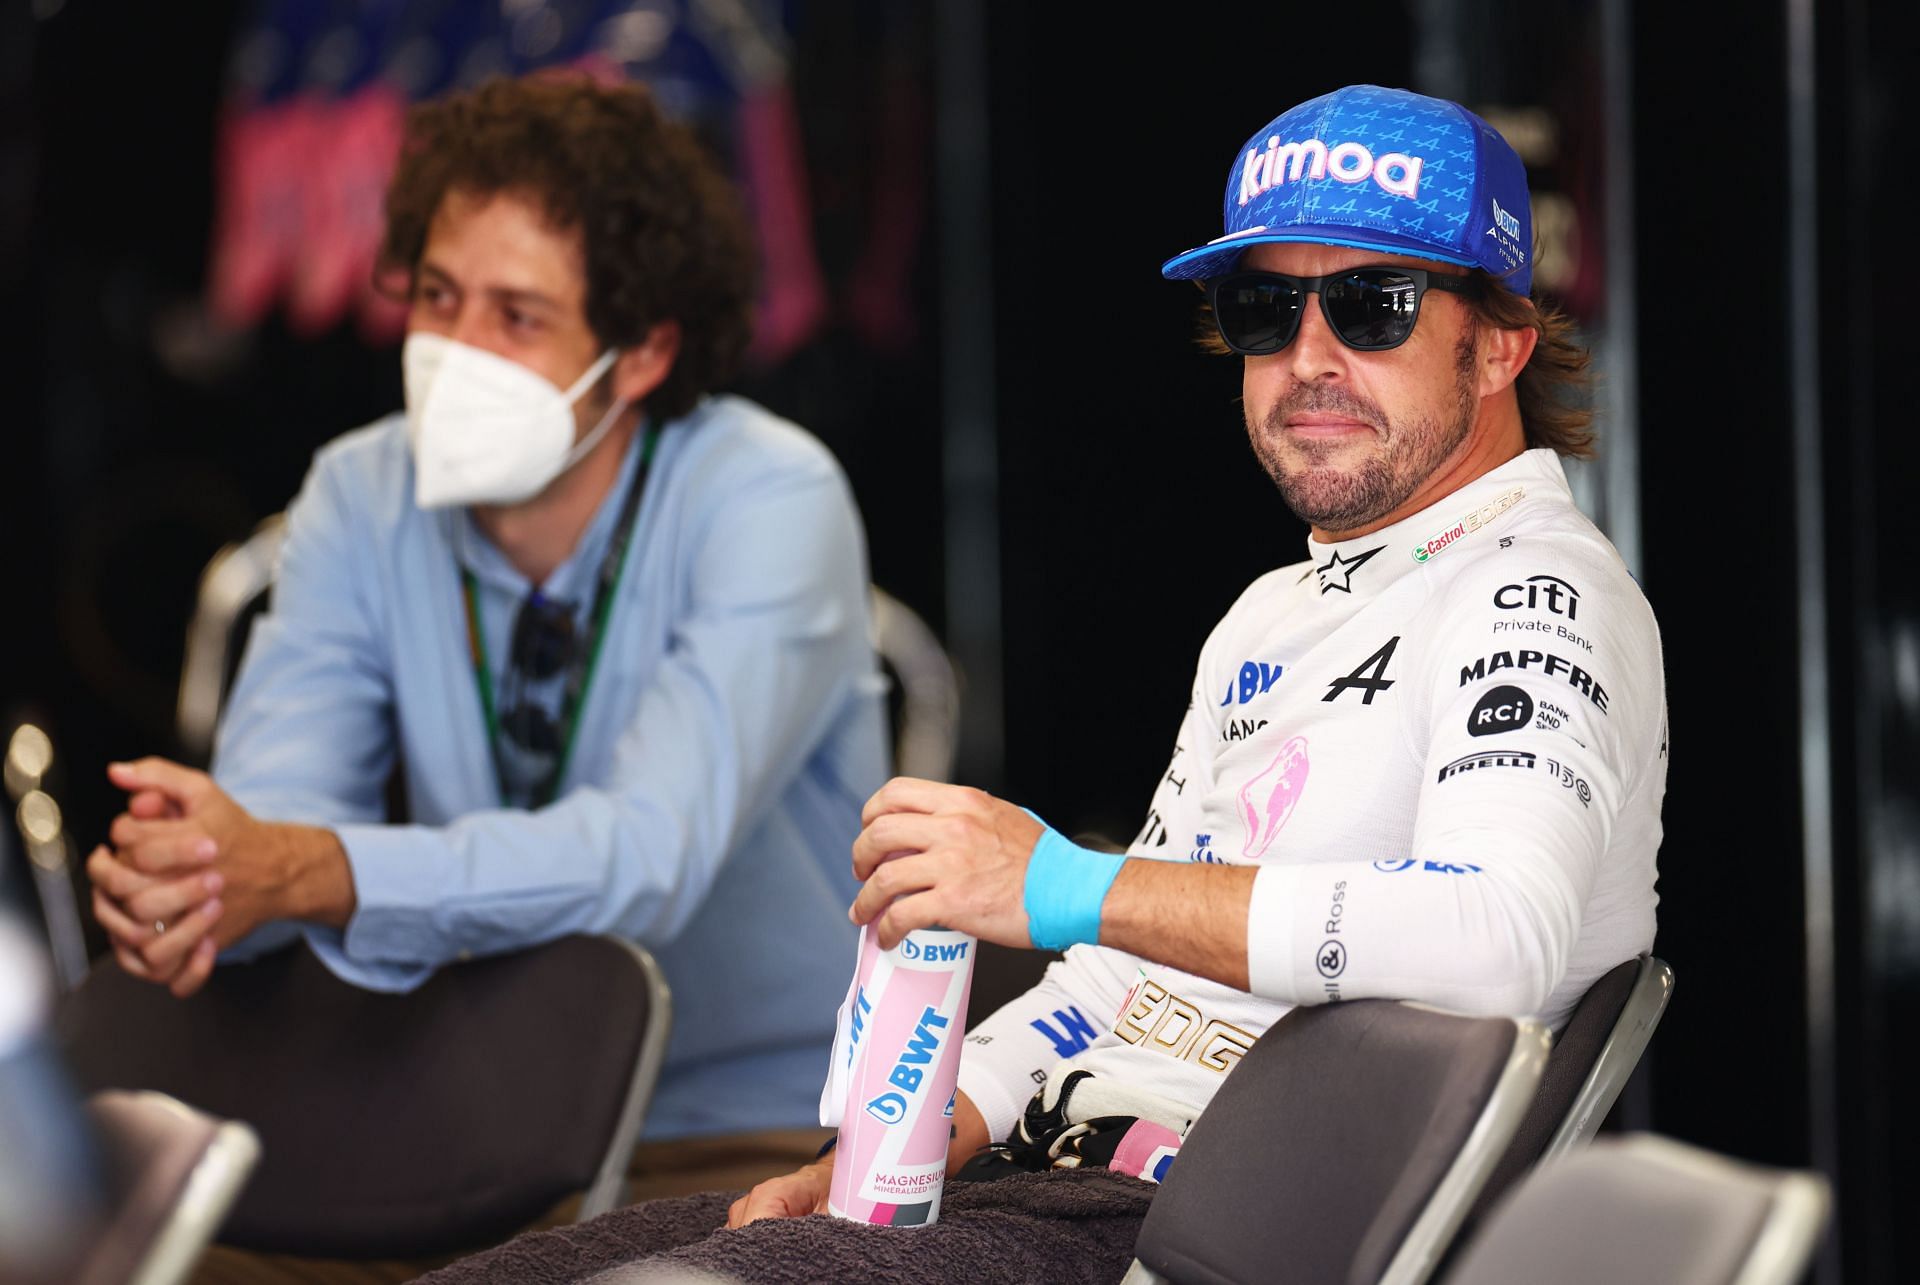 Fernando Alonso secured a spectacular comeback into points from the back of the grid